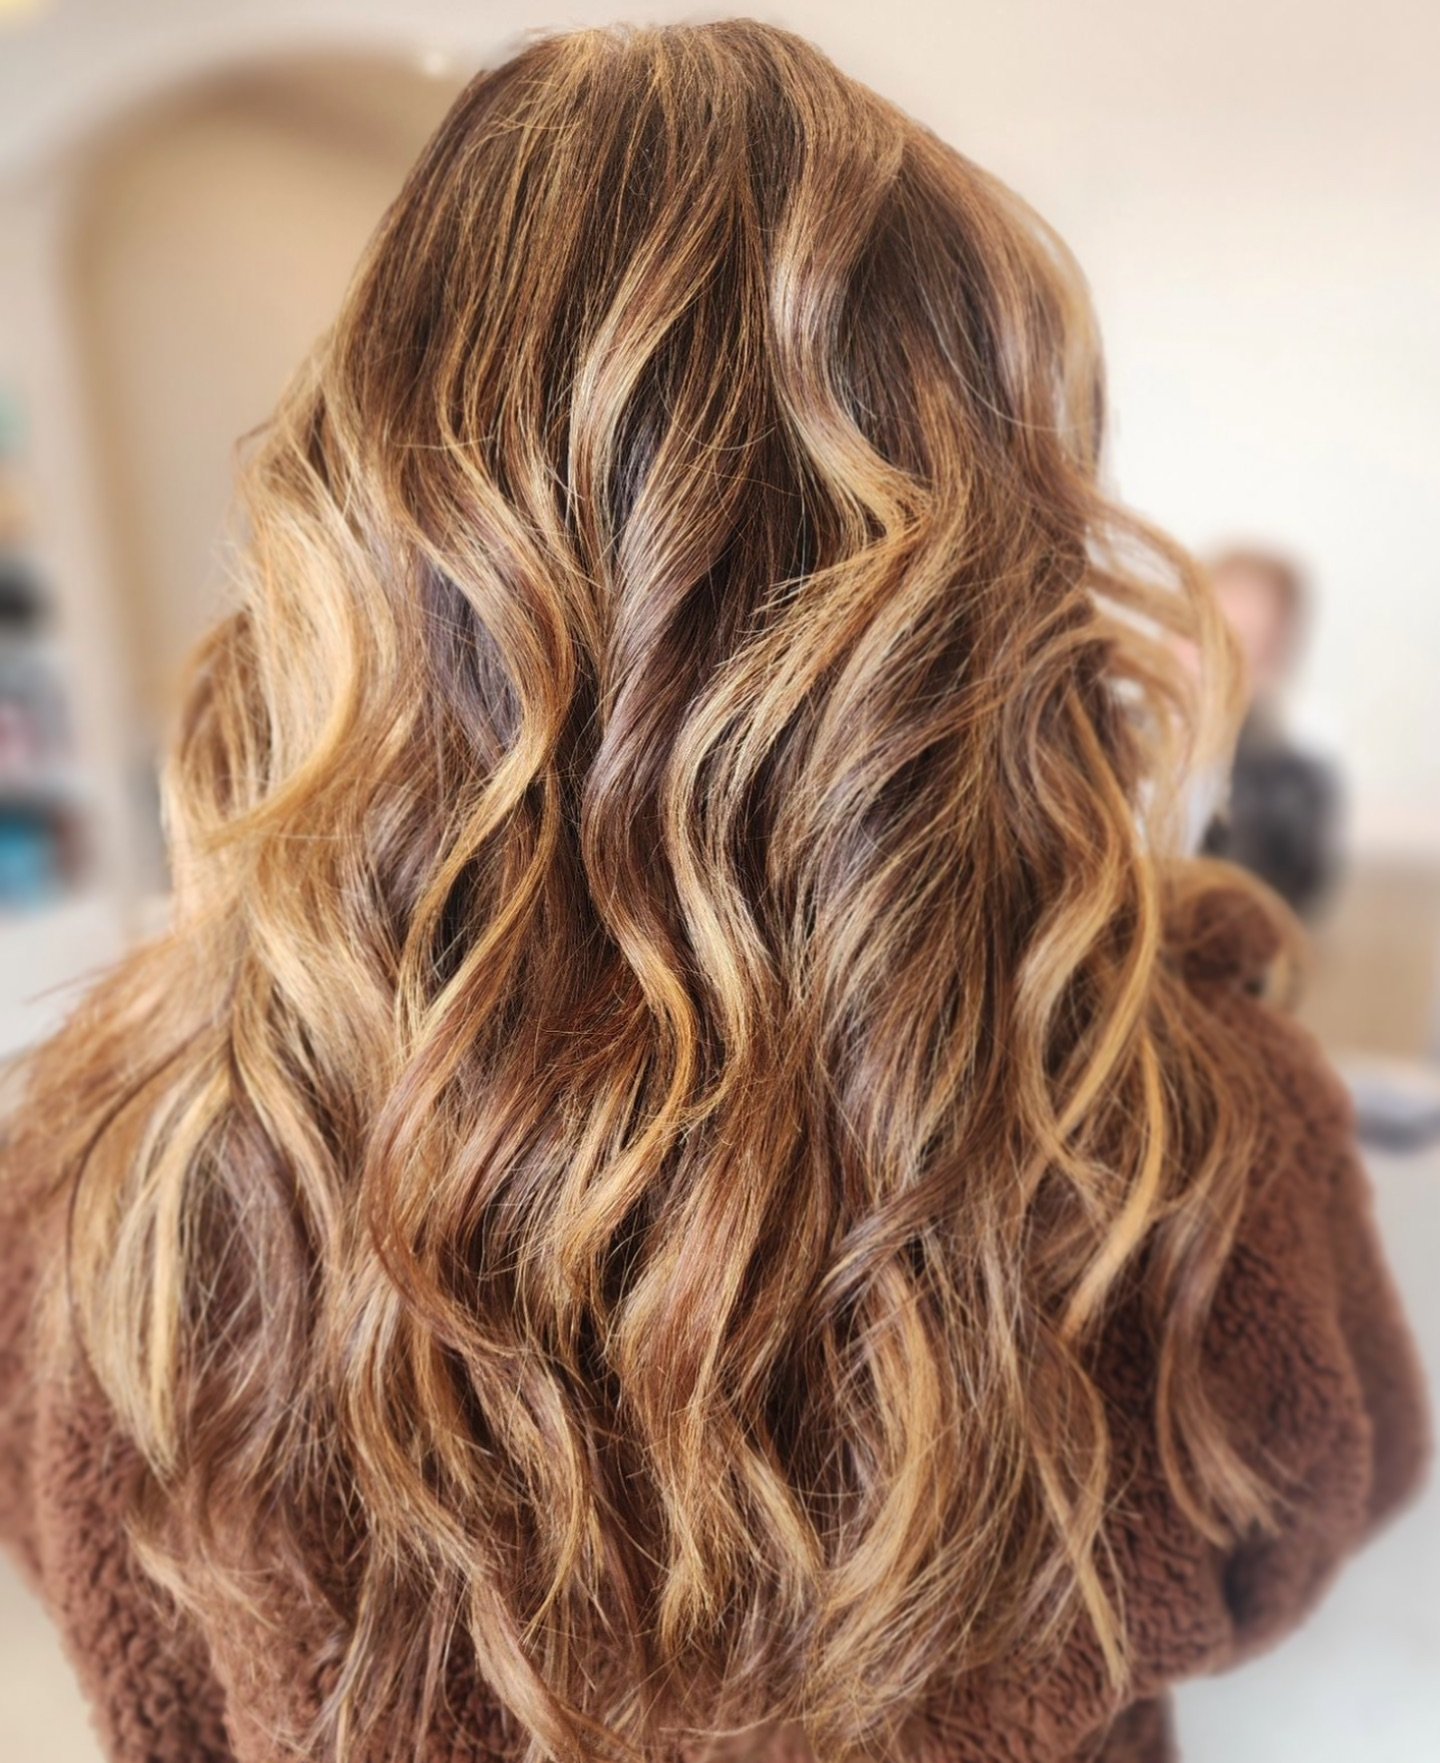 Beach-ready waves 🌊

Hair by Lisa

Purchase two or more products and get the third for 50% off. Also, purchase any two products and be entered to win a liter-sized shampoo and conditioner! To make an appointment, give us a call at 517.225.5958 or bo